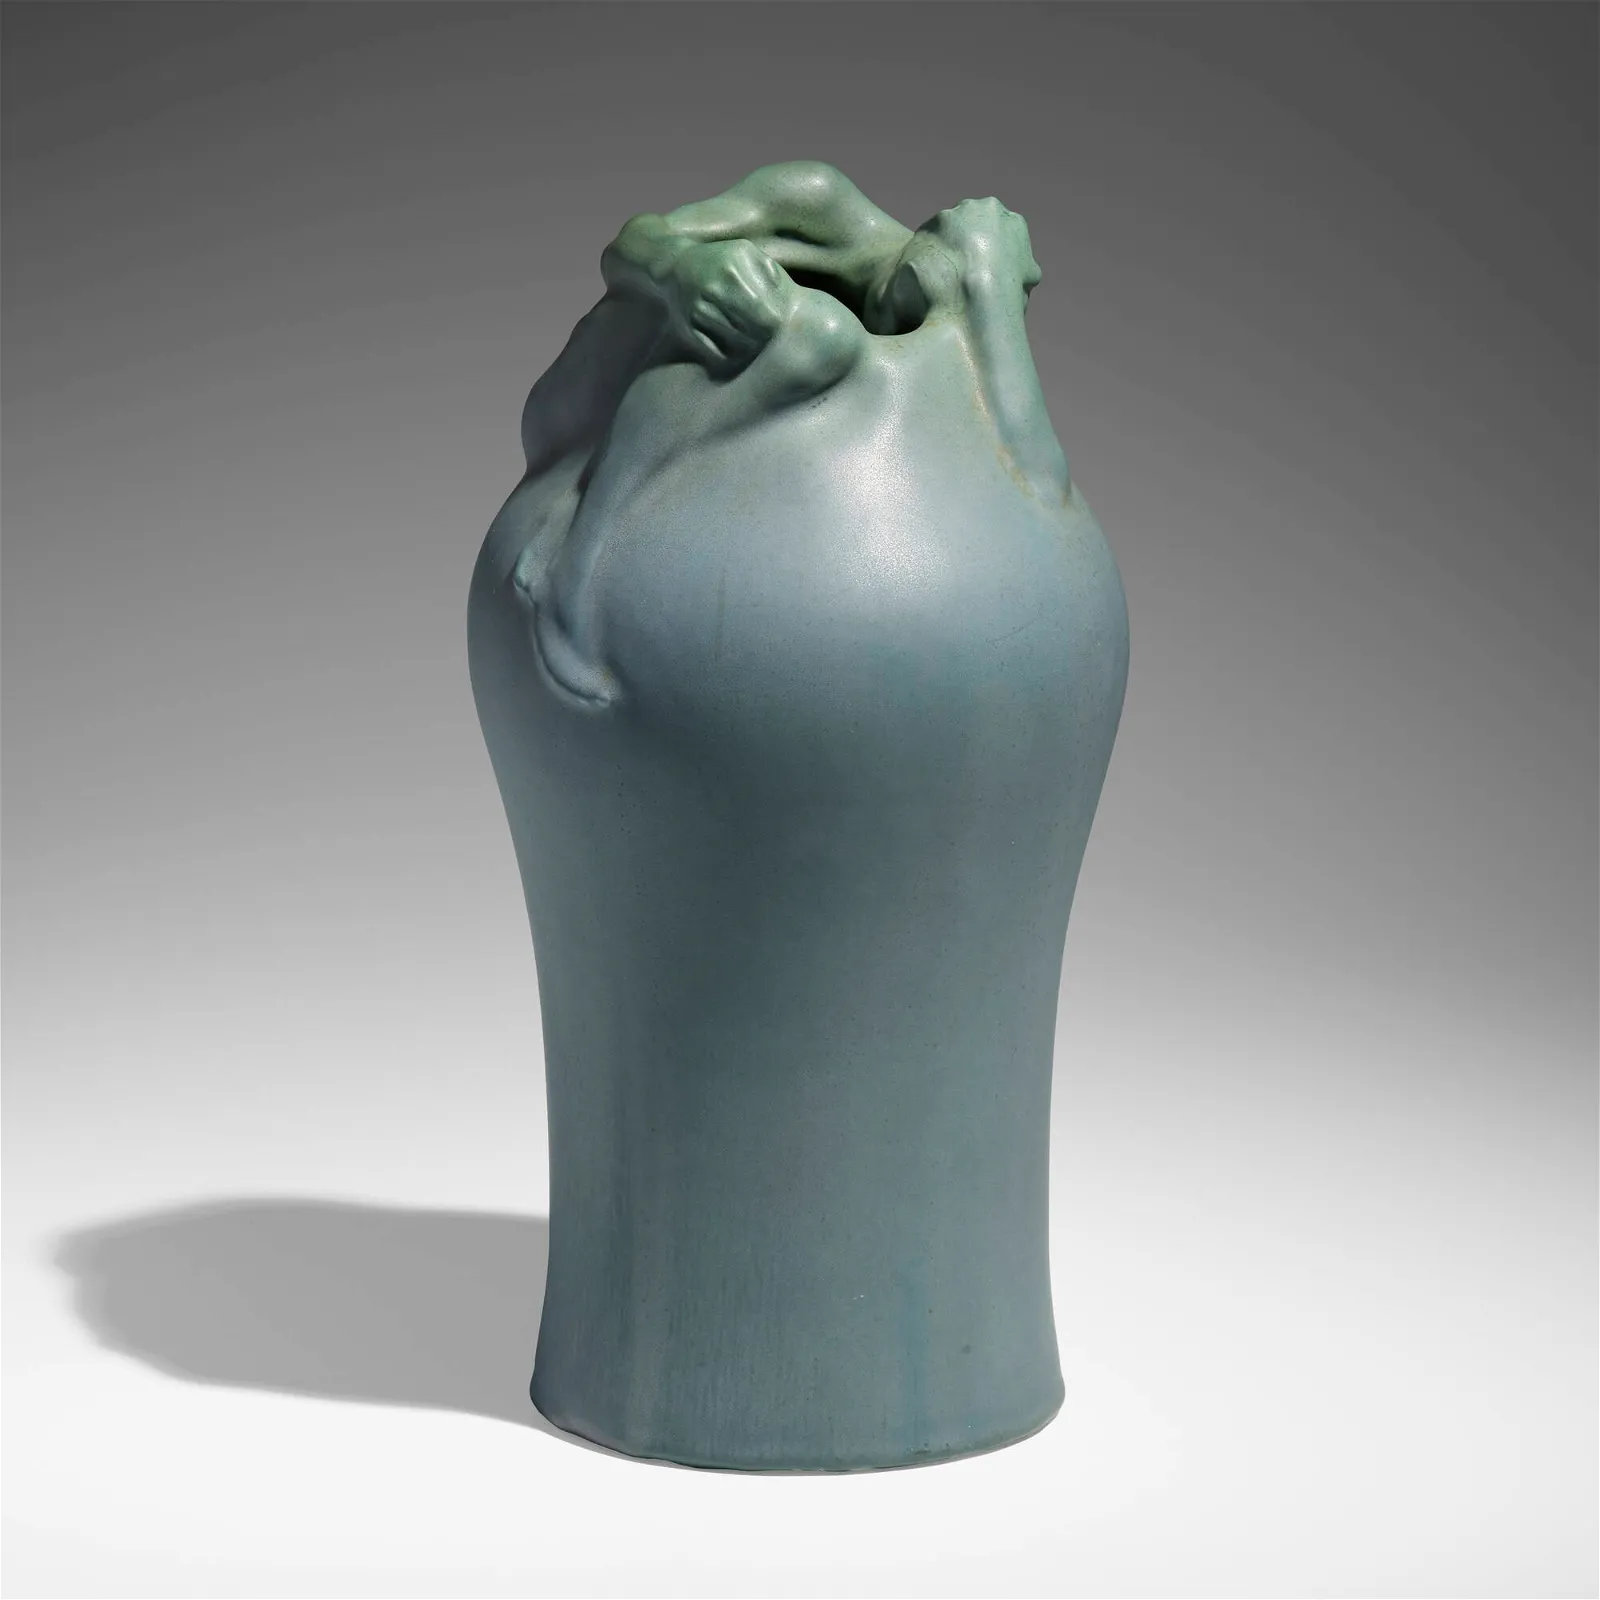 1902 Despondency vase by Artus Van Briggle for Van Briggle Pottery, which sold for $104,800 with buyer’s premium at Rago.